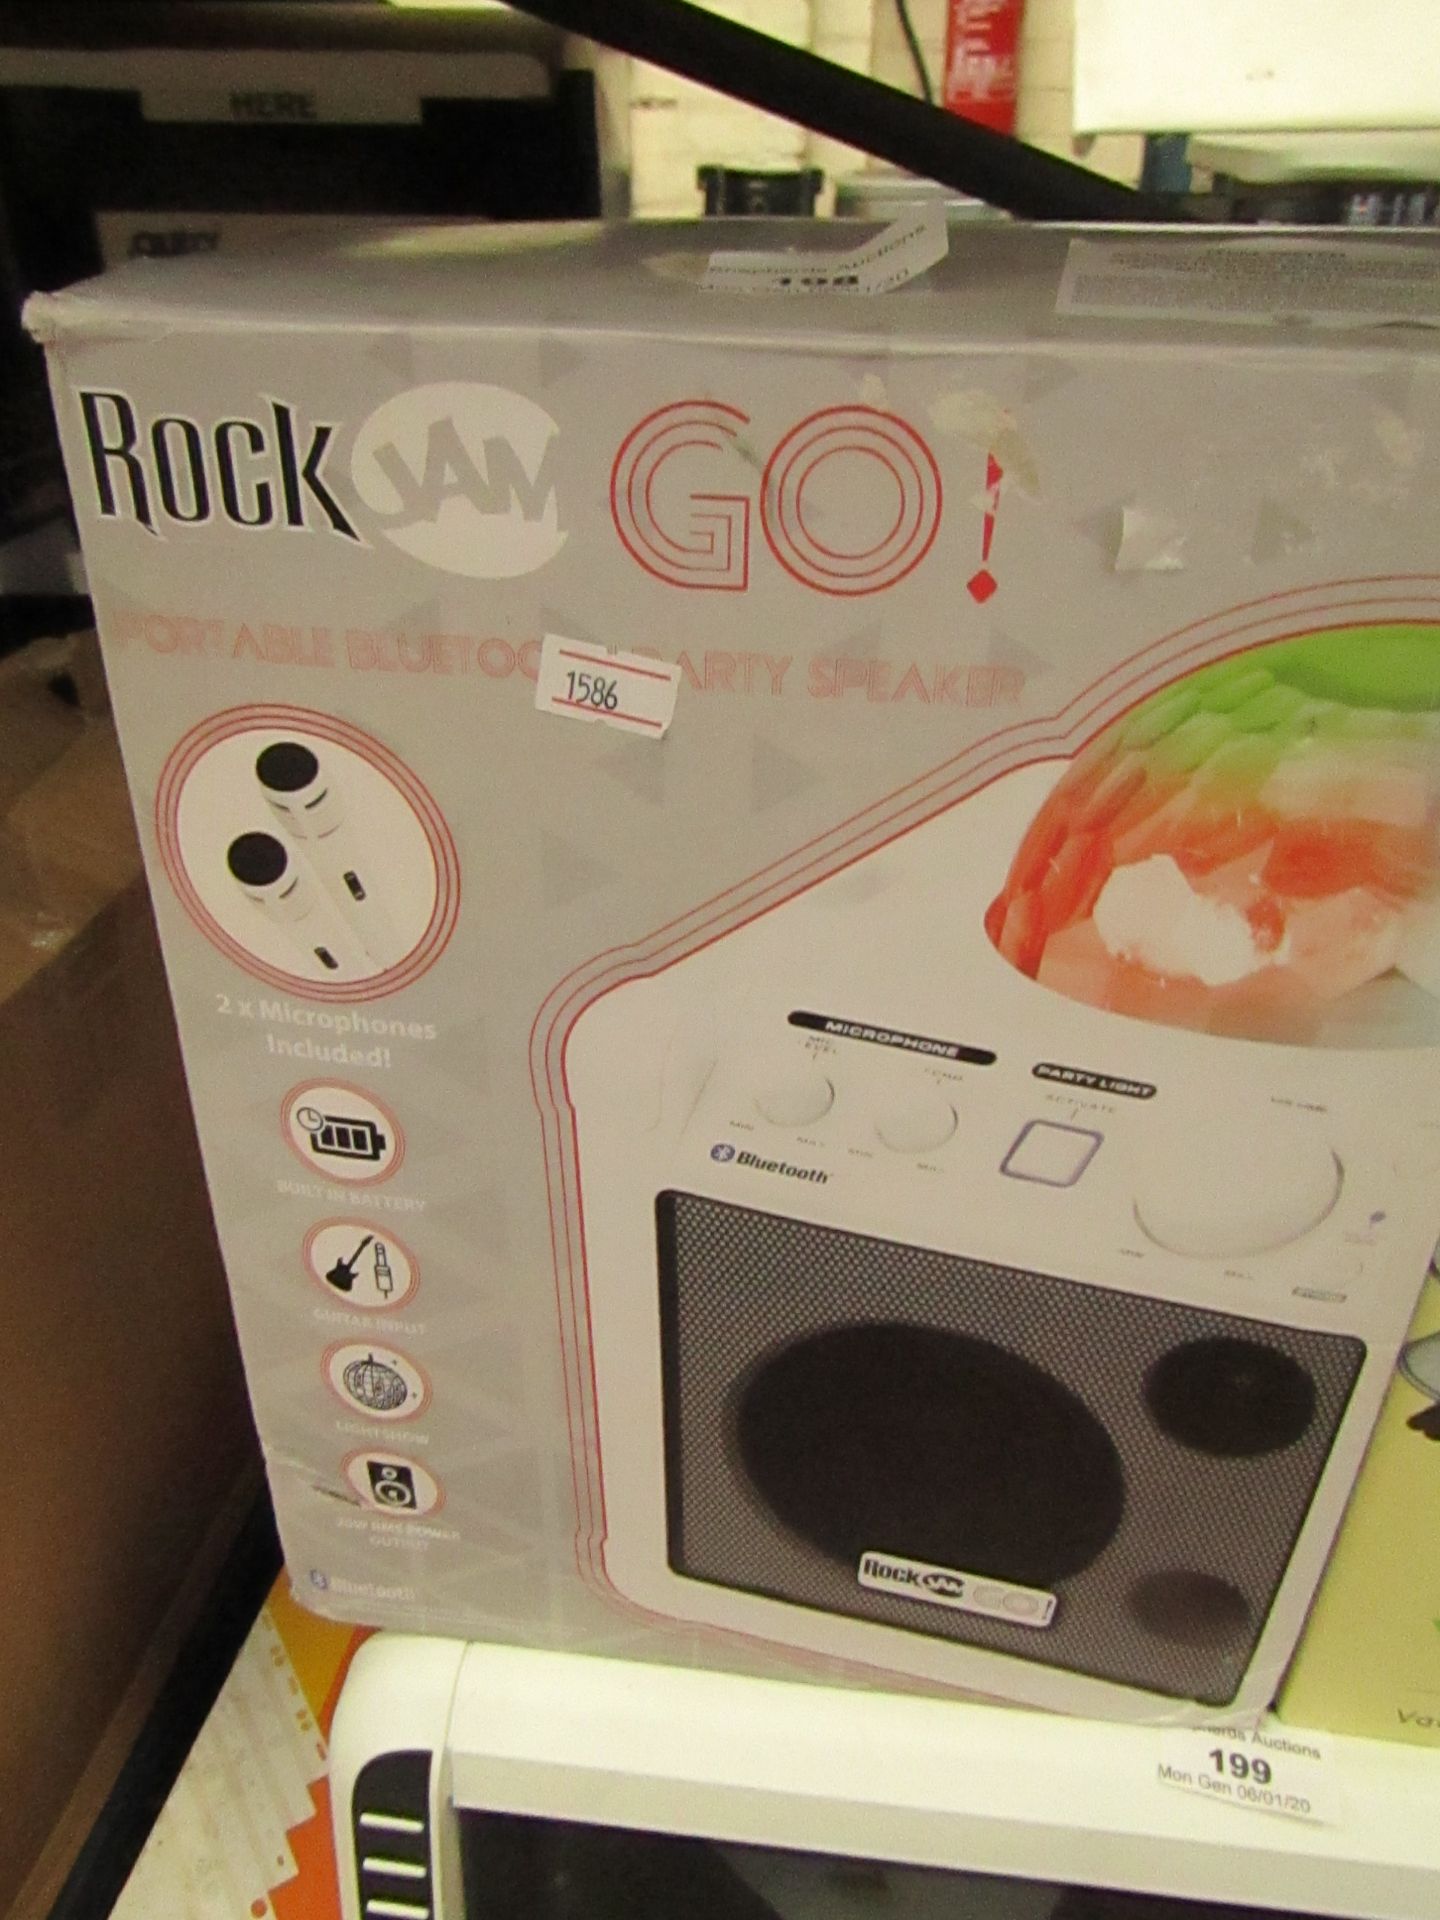 Rock Jam Go! - Portable bluetooth party speaker - Tested working and boxed.